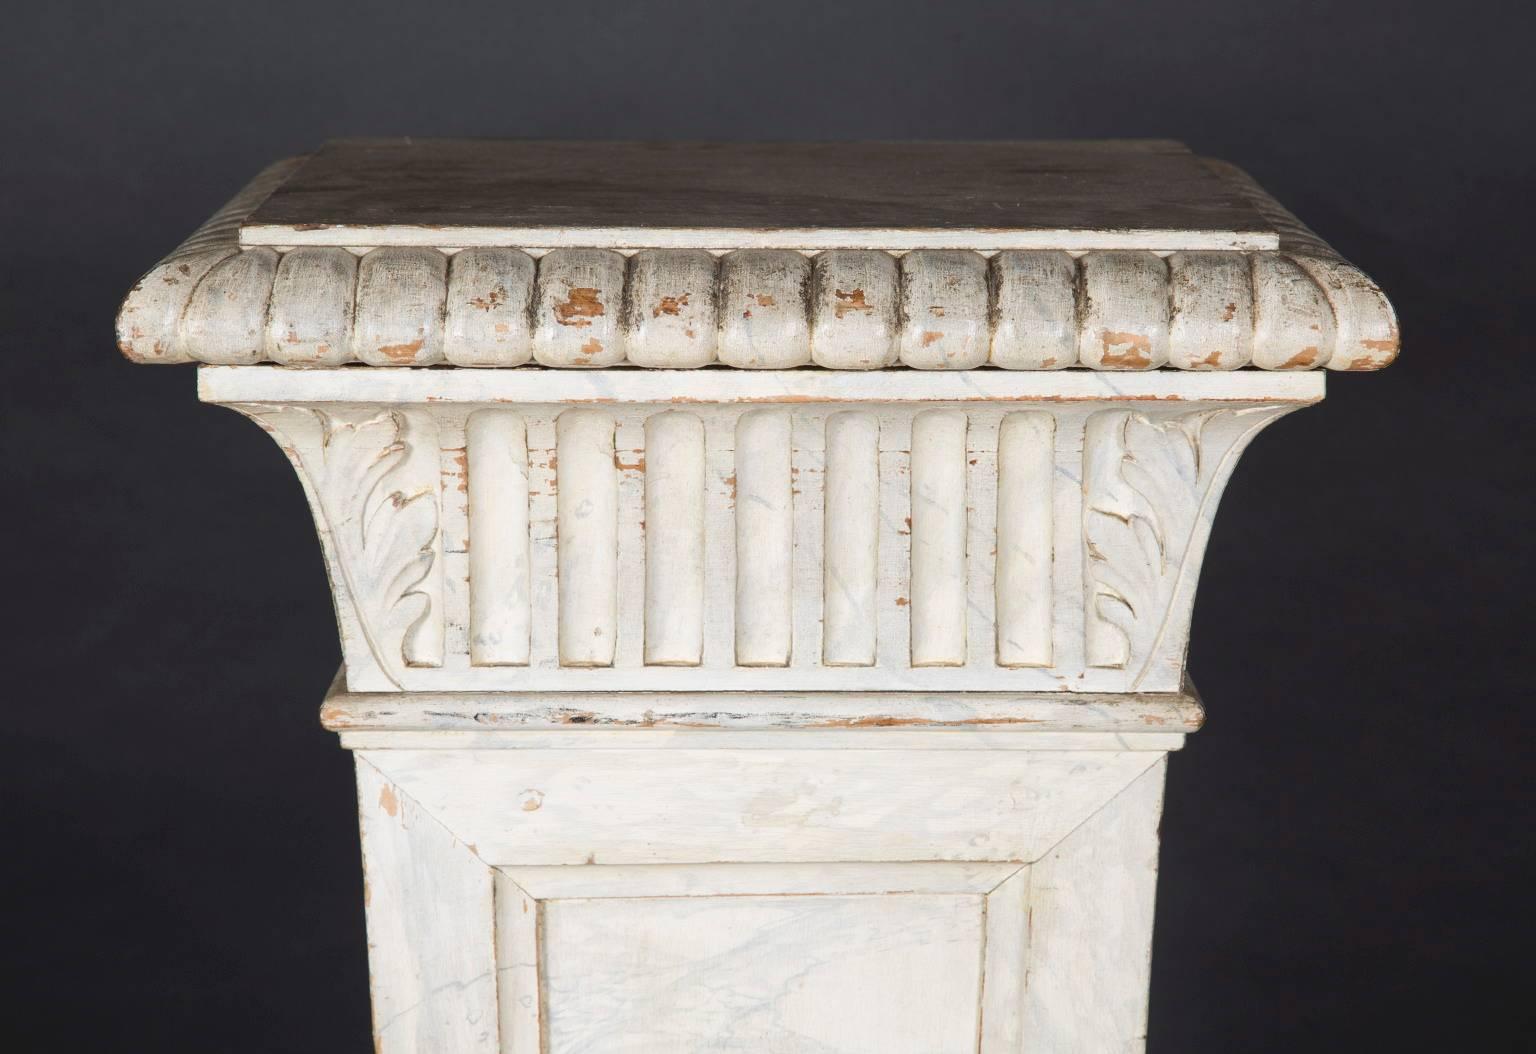 This tall pedestal was made in 19th century France. It is made of wood and is decorated and painted to resemble marble on three sides. The pedestal is decorated with various carvings, including with egg and dart carved trim along the top.

The piece